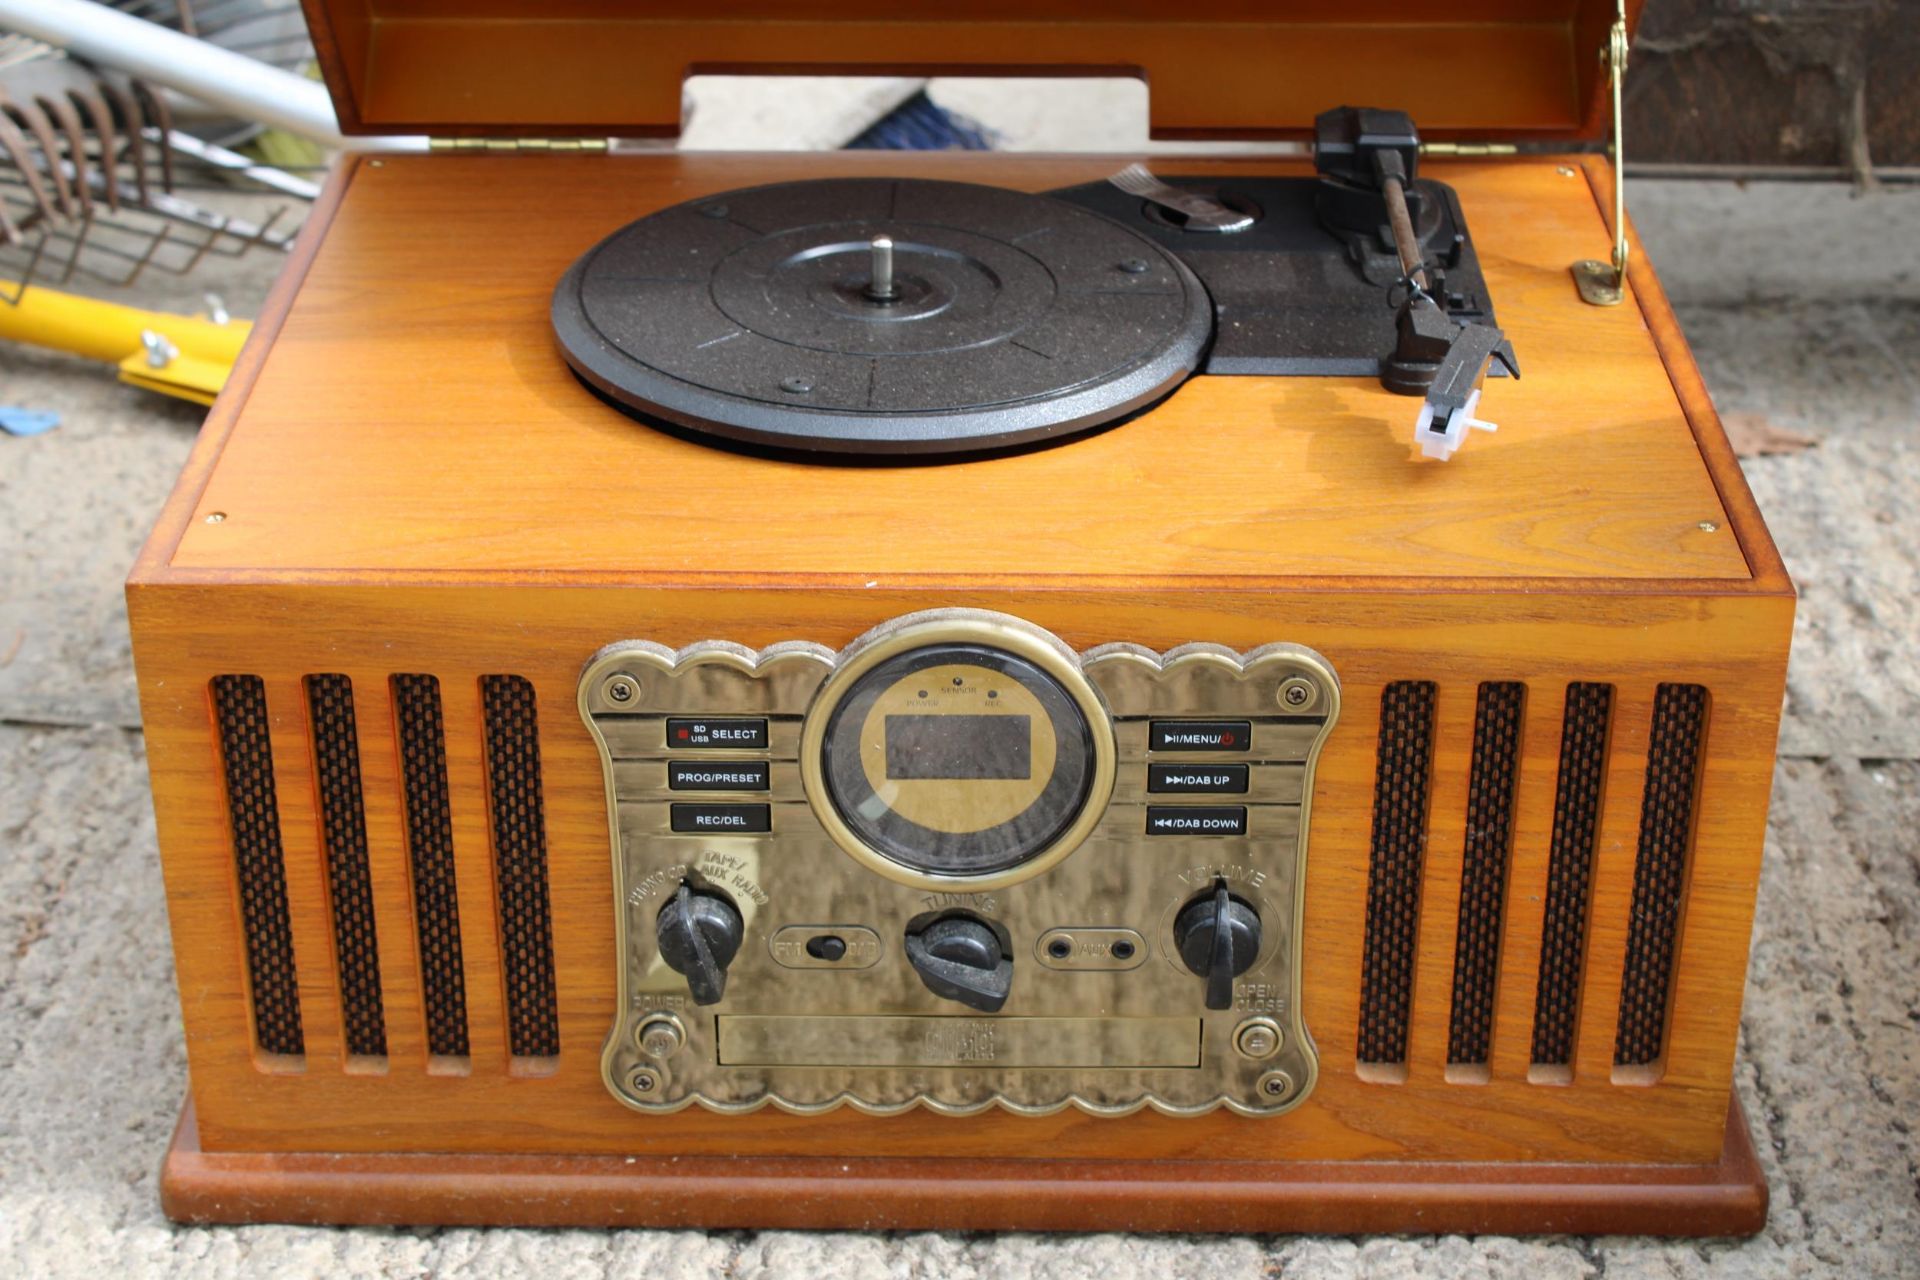 A RETRO STYLE PORTABLE RECORD PLAYER AND A CLOTHES PRESS - Image 2 of 4